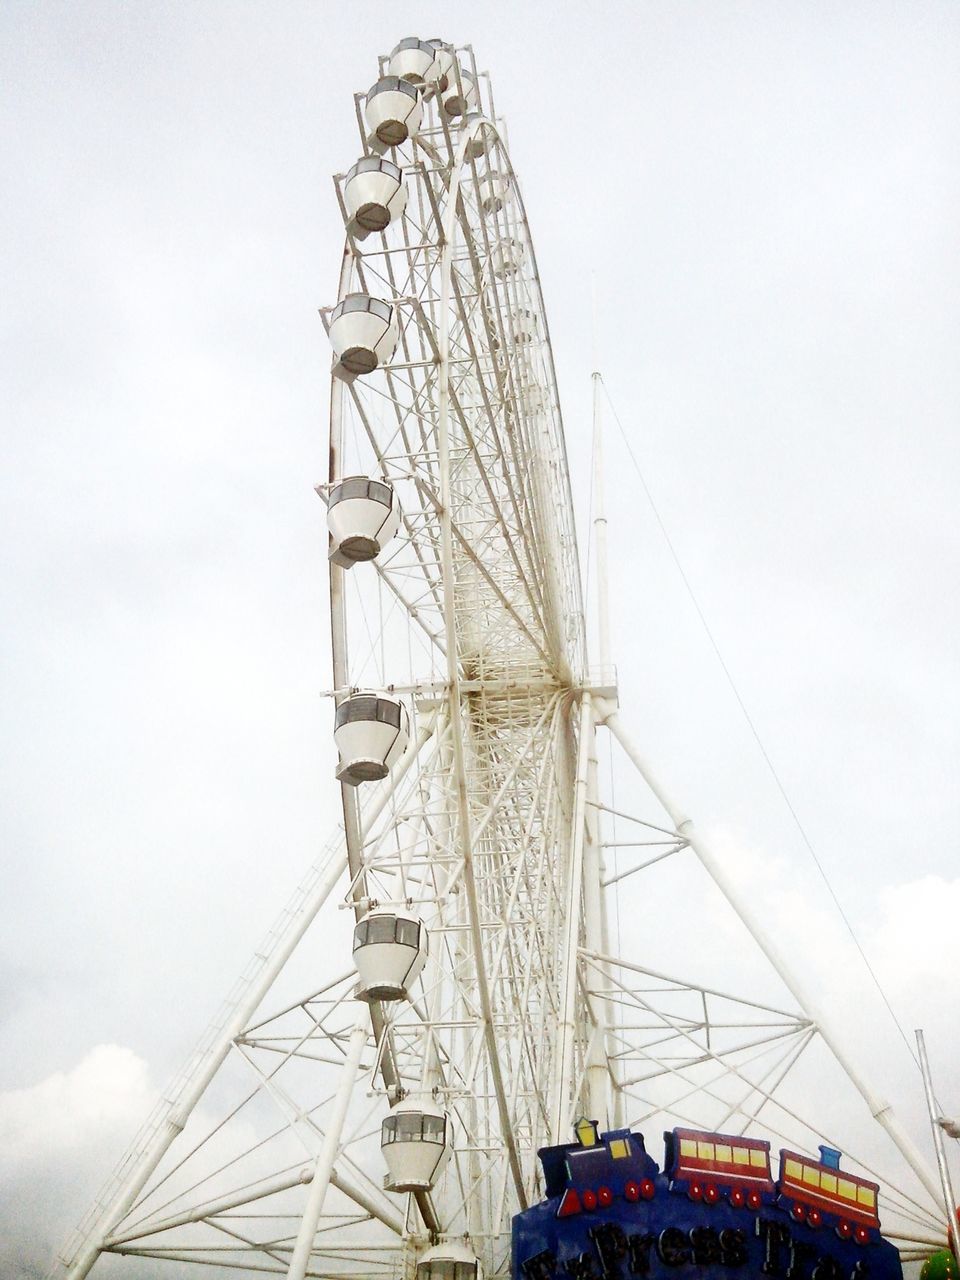 LOW ANGLE VIEW OF FERRIS WHEEL AGAINST SKY